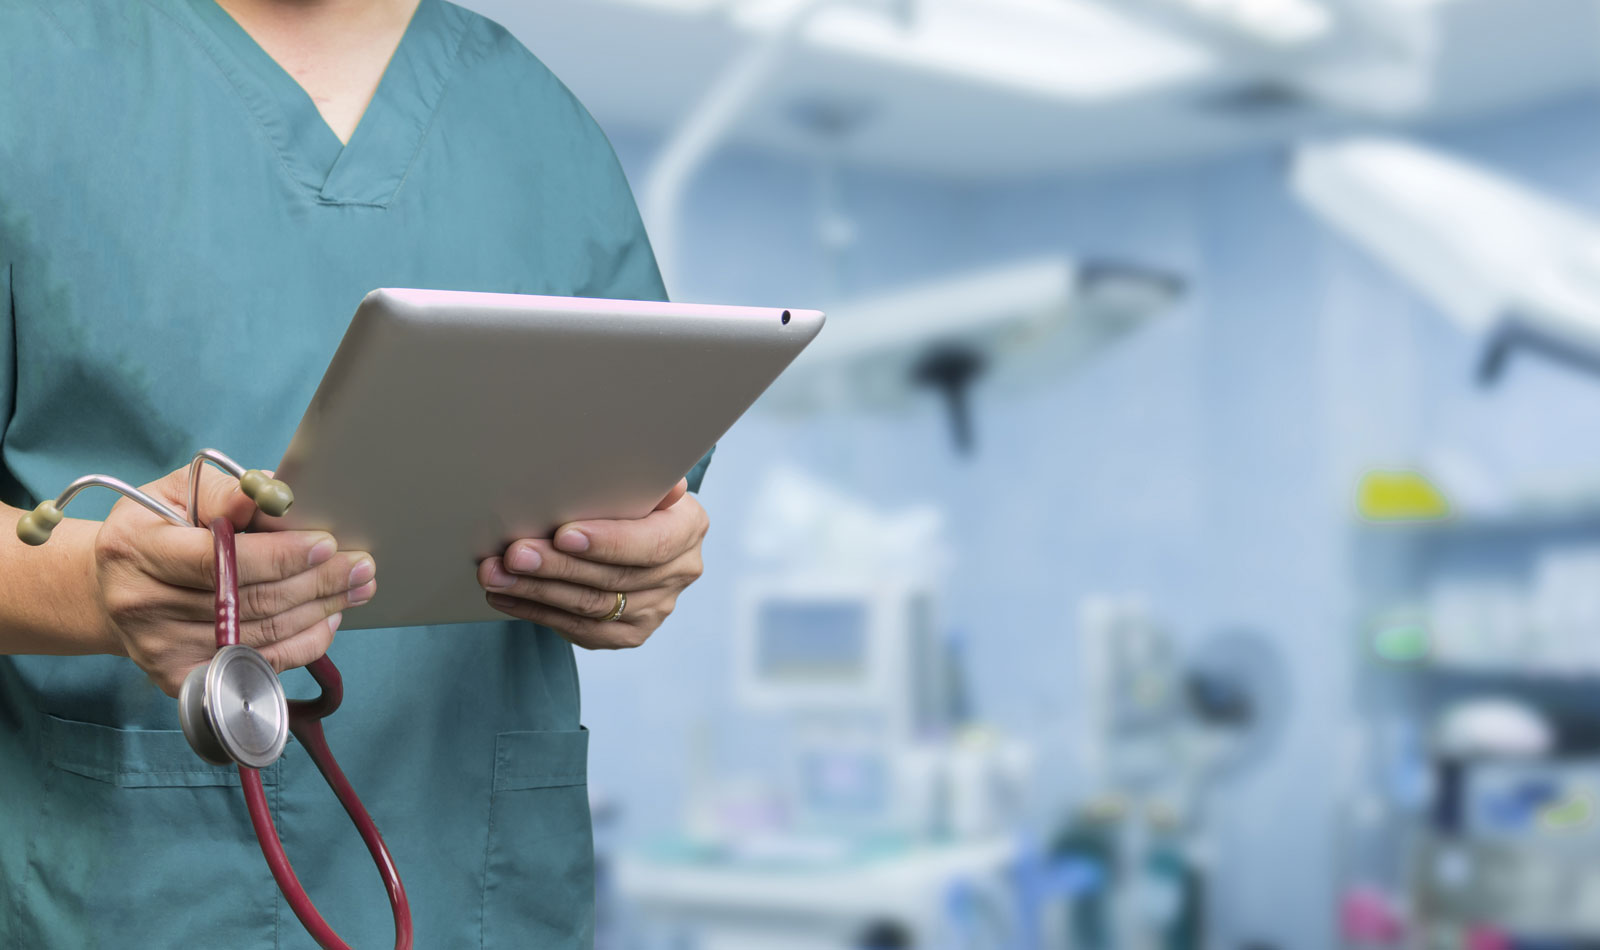 doctor holding ipad and stethoscope